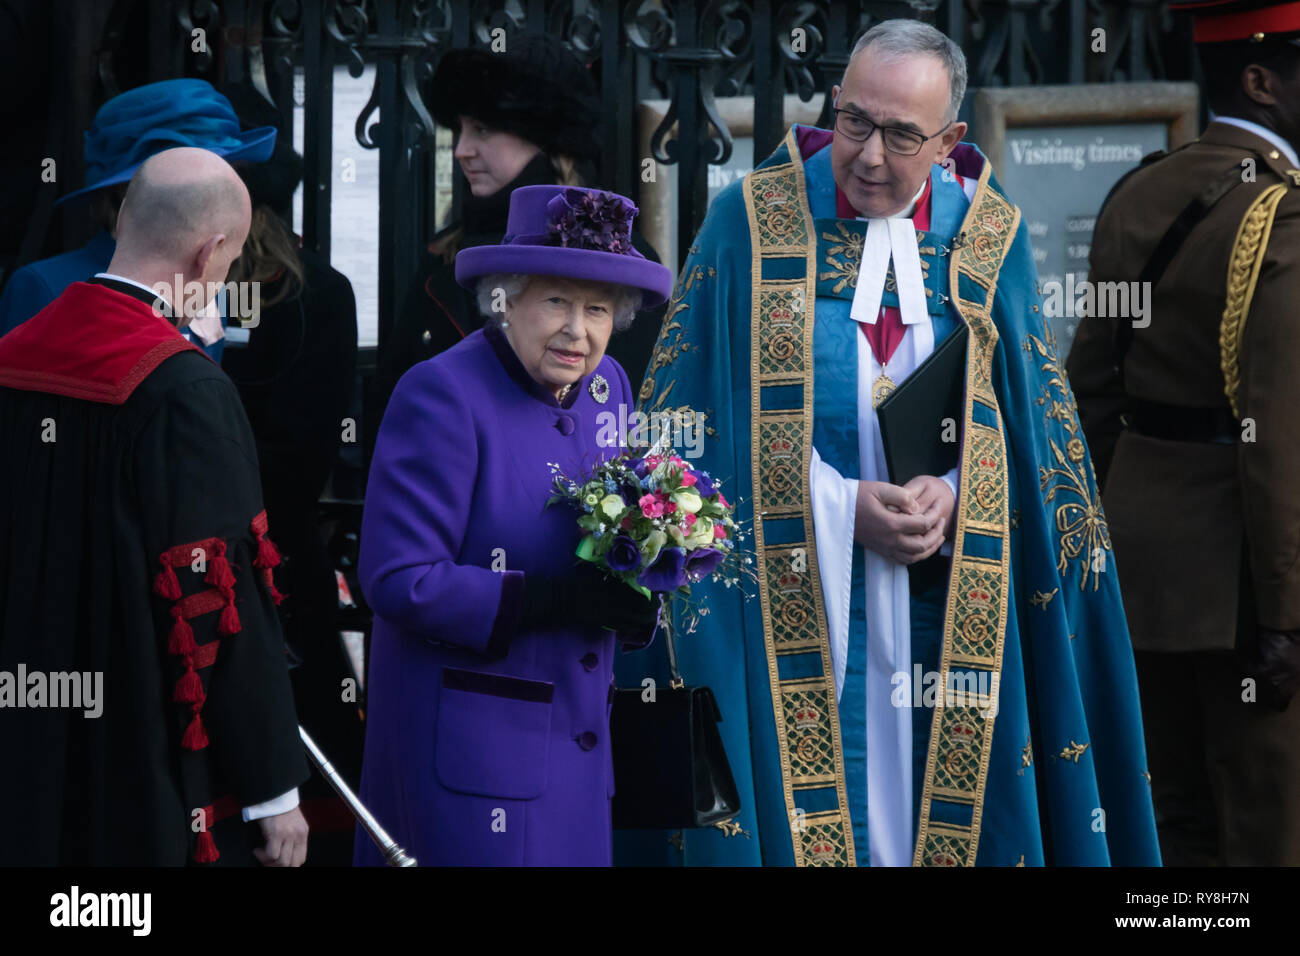 Her Majesty, Queen Elizabeth II stands alongside John Hall, Dean of Westminster following a service for Commonwealth Day at Westminster Abbey Stock Photo